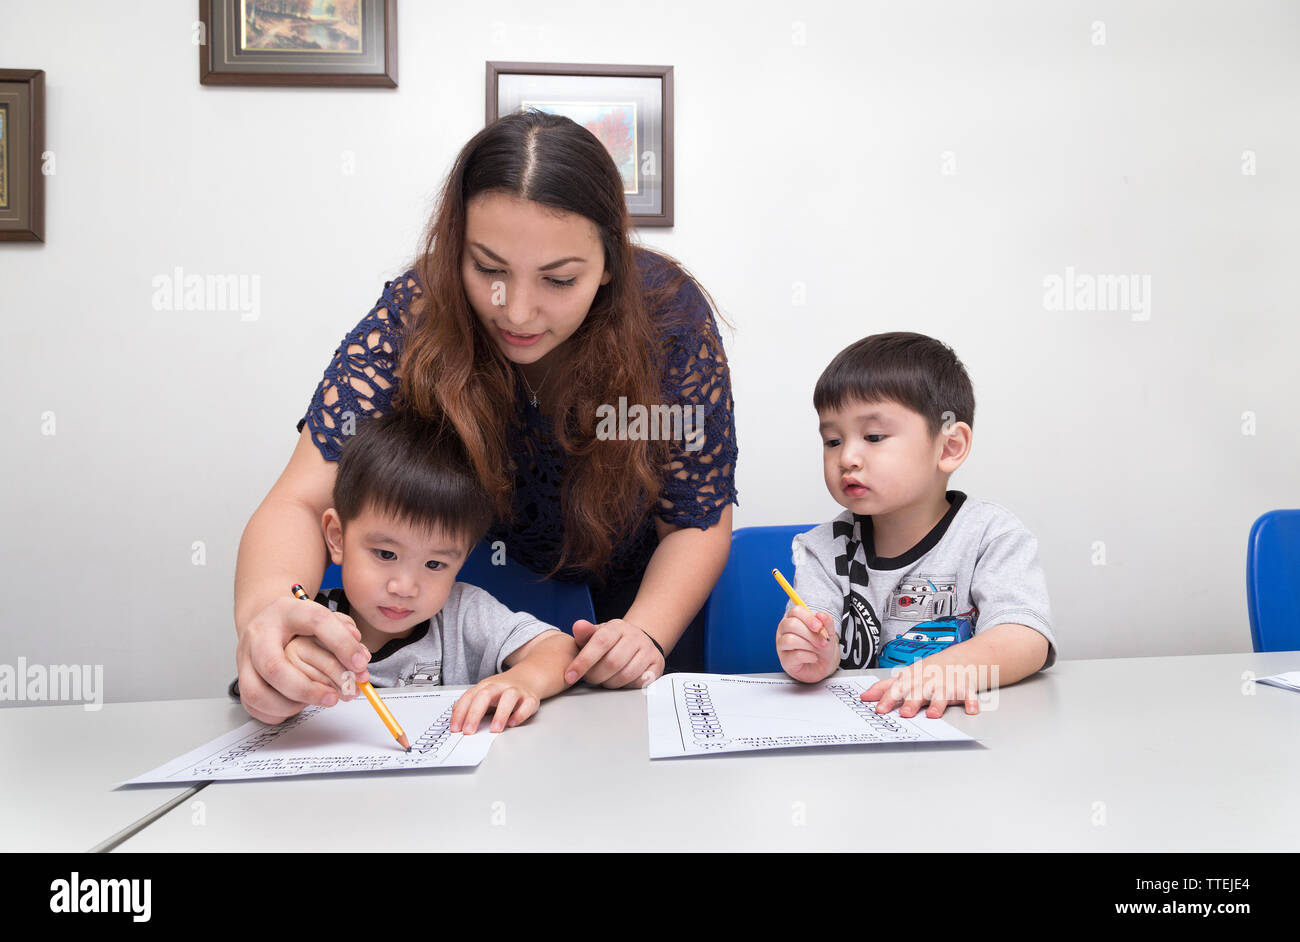 Manila, Philippines - August, 18, 2016: A female teacher teaching two little boys, explaining how to write in classroom at school Stock Photo